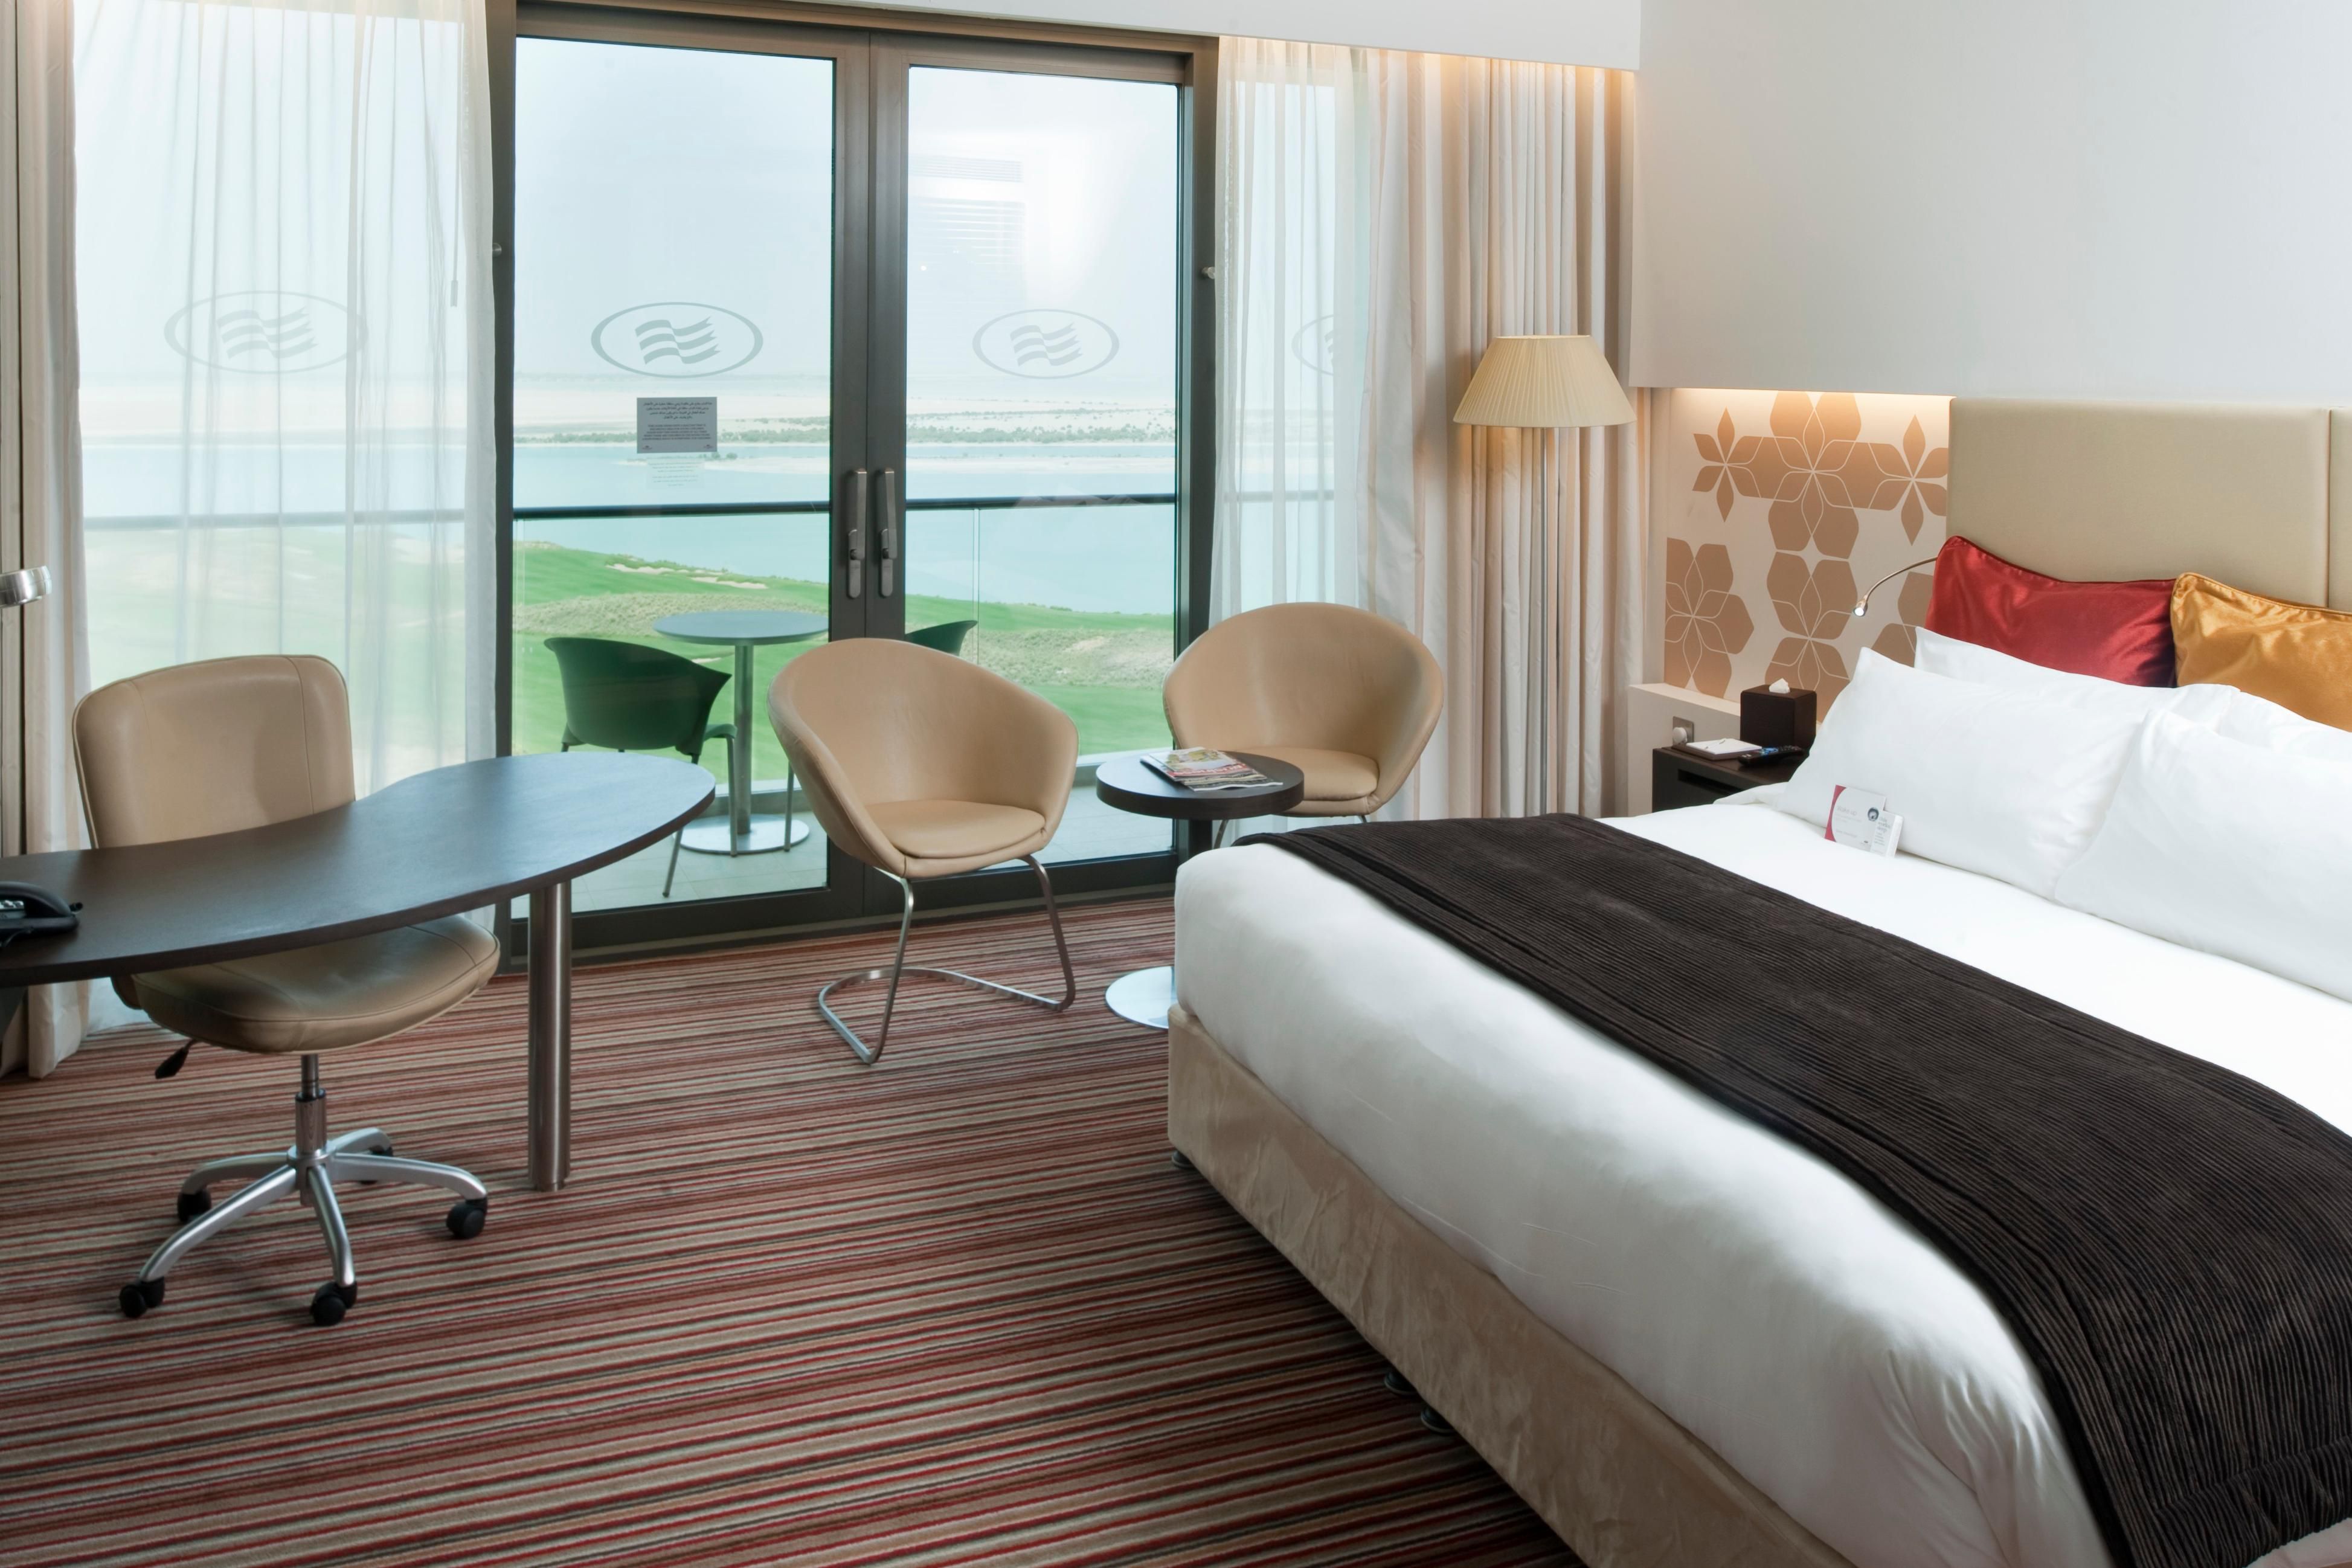 Enjoy a breathtaking view of the sea in our Deluxe Room